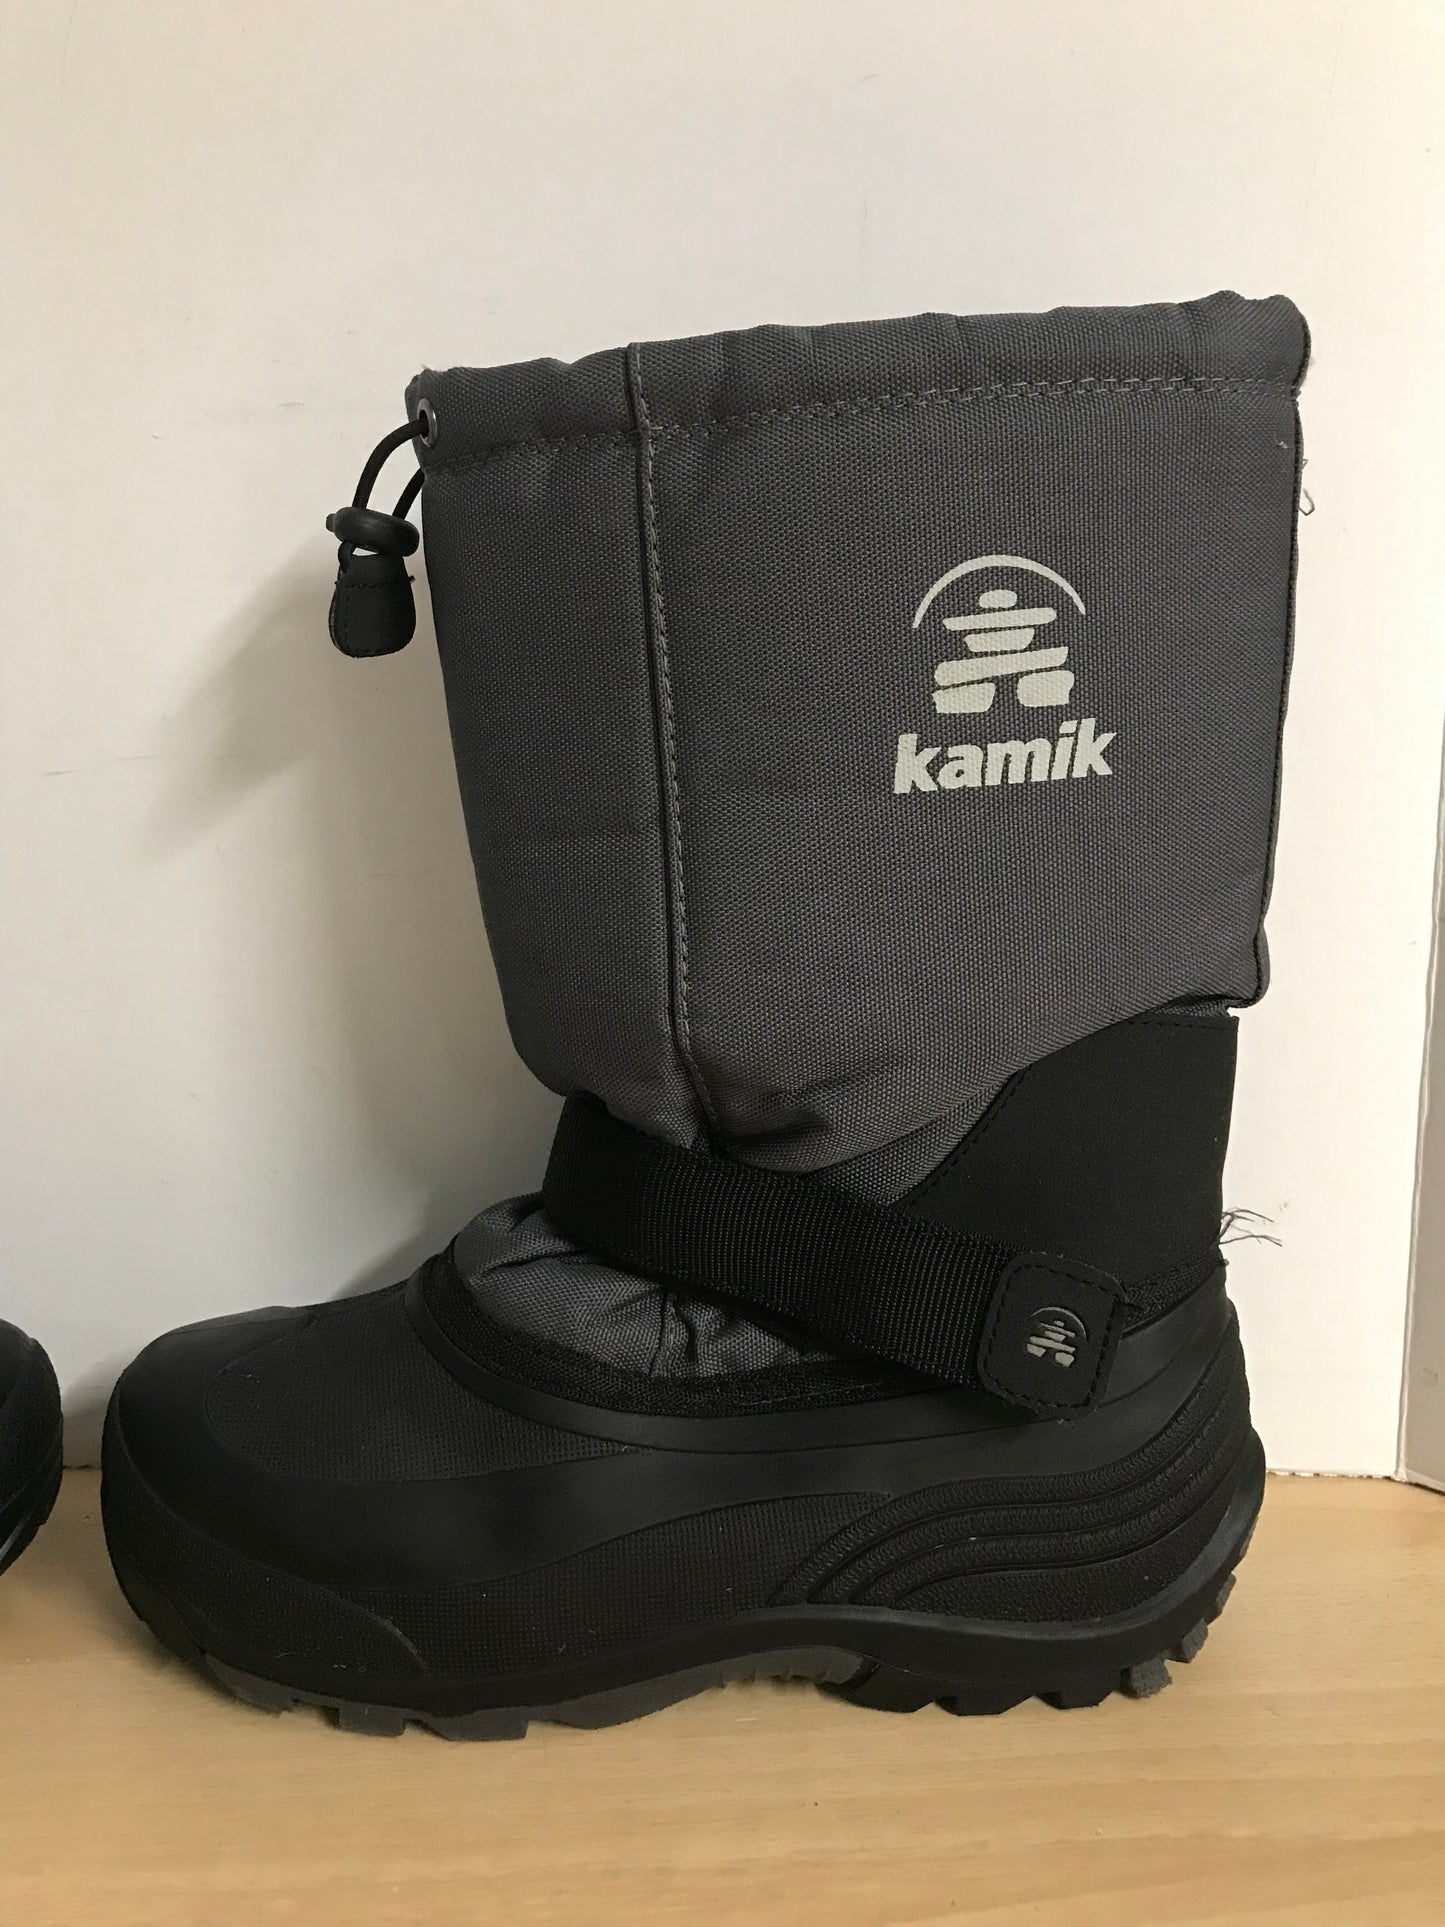 Winter Boot Child Size 6 Youth Kamik With Liner Grey Black Excellent